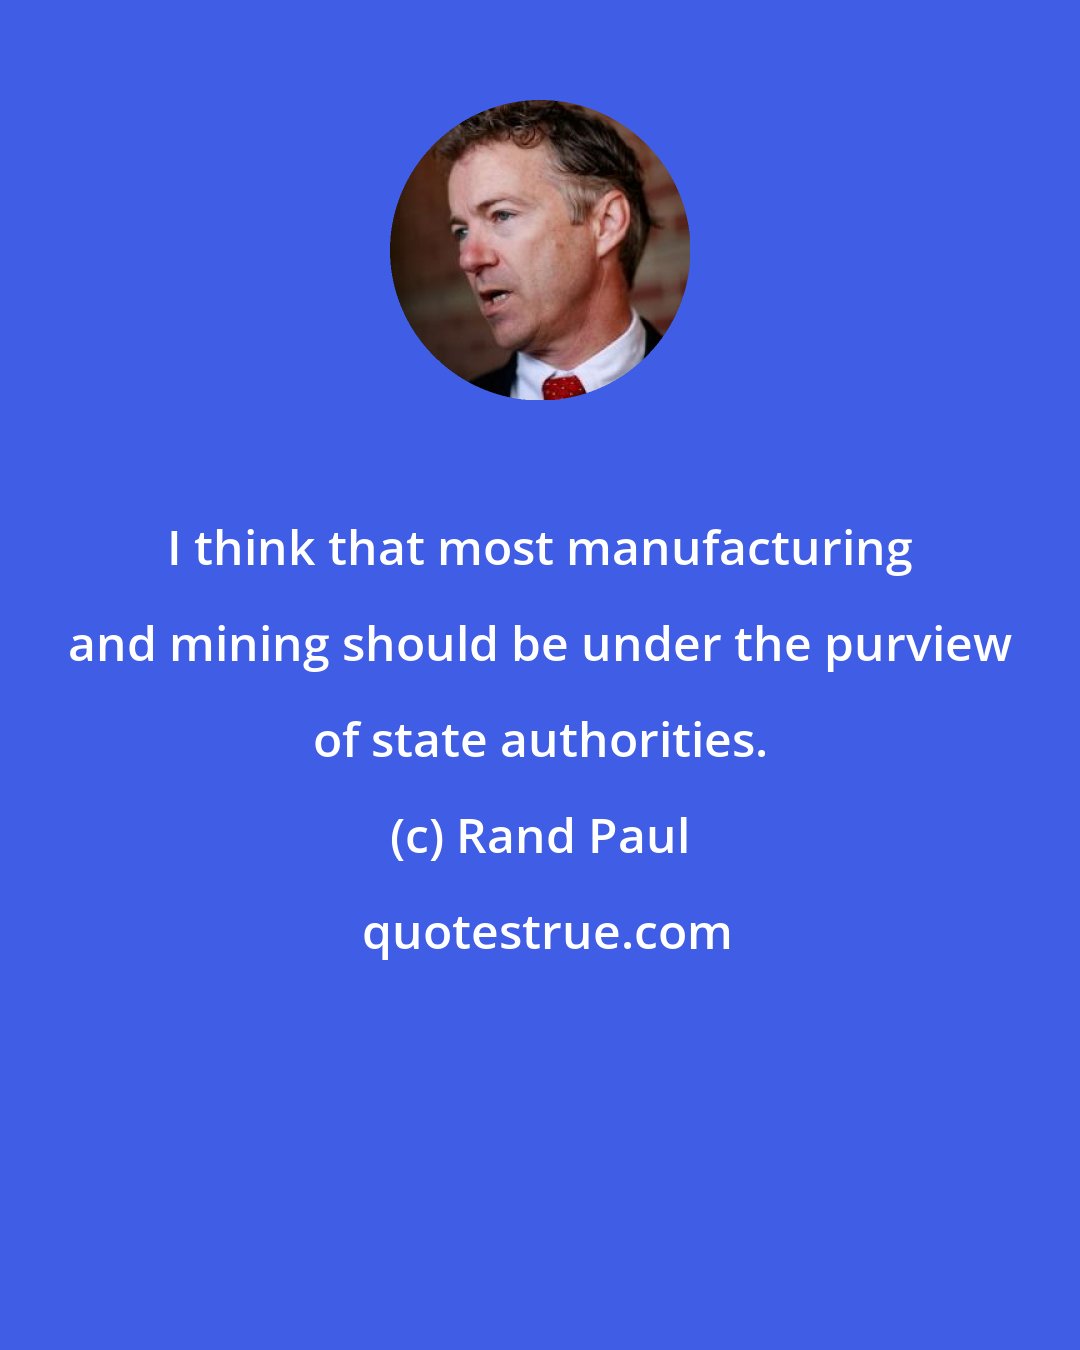 Rand Paul: I think that most manufacturing and mining should be under the purview of state authorities.